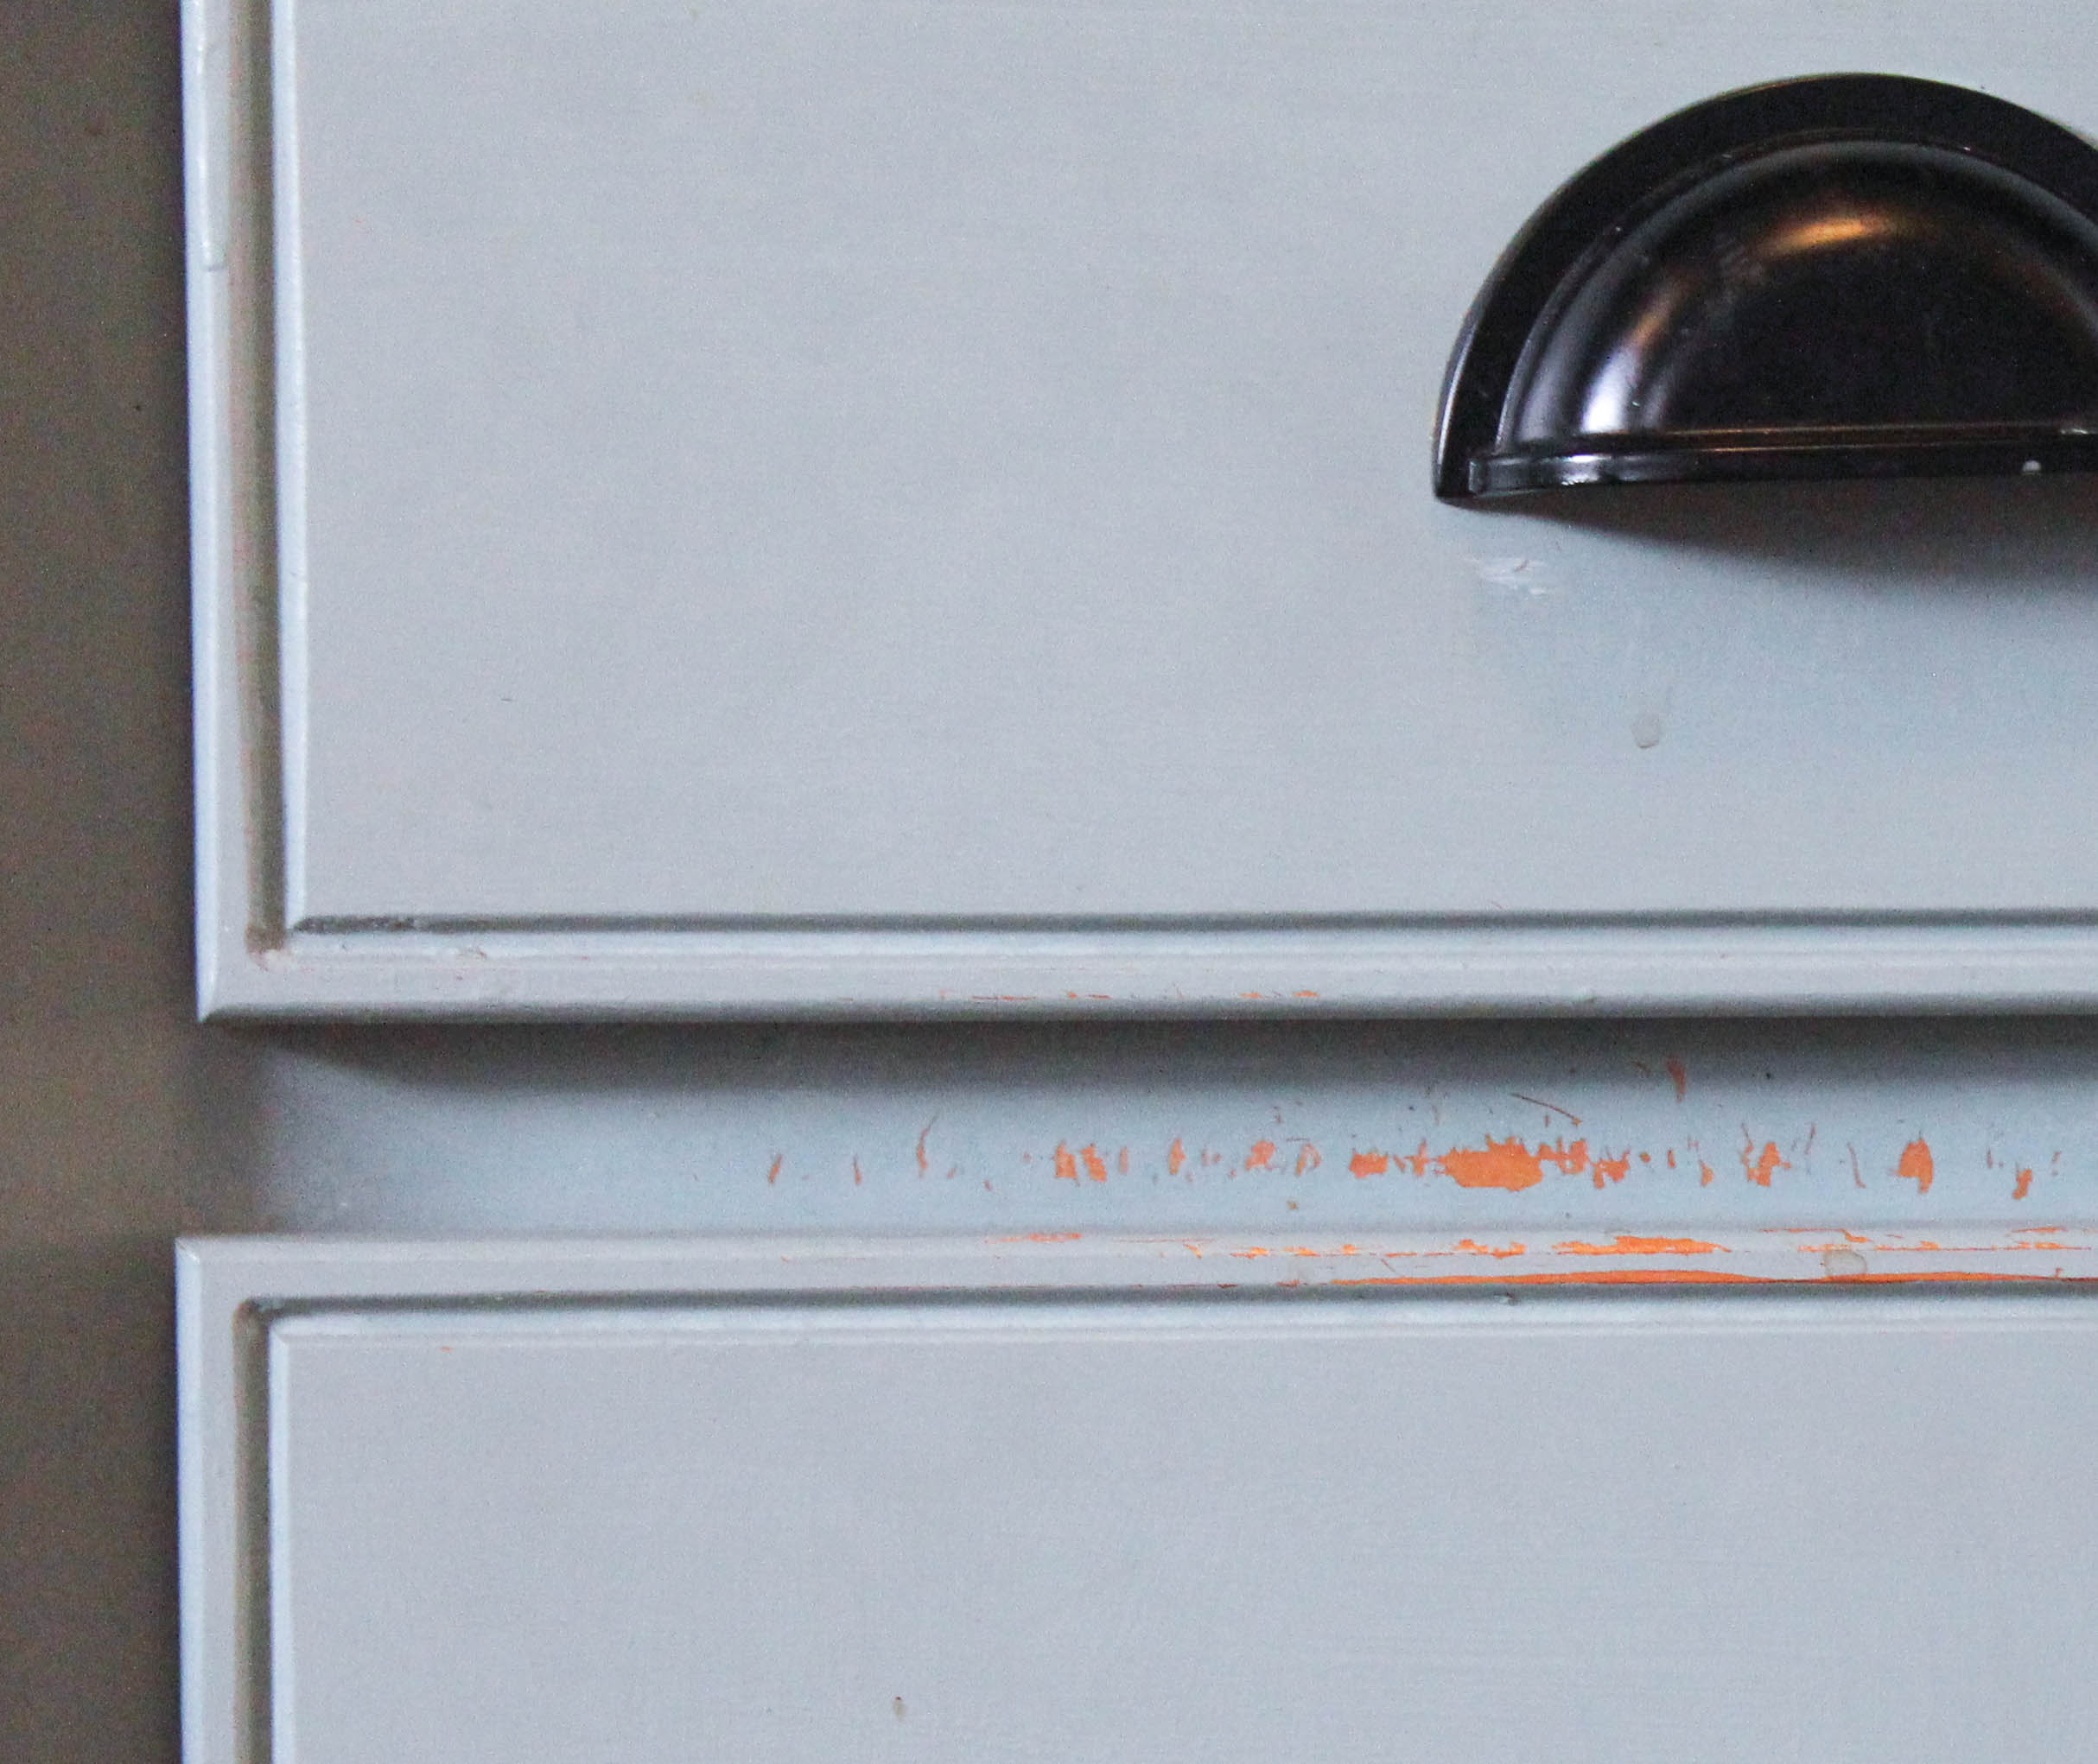 White Painted Cabinets, How To Clean White Painted Cabinets That Have Yellowed